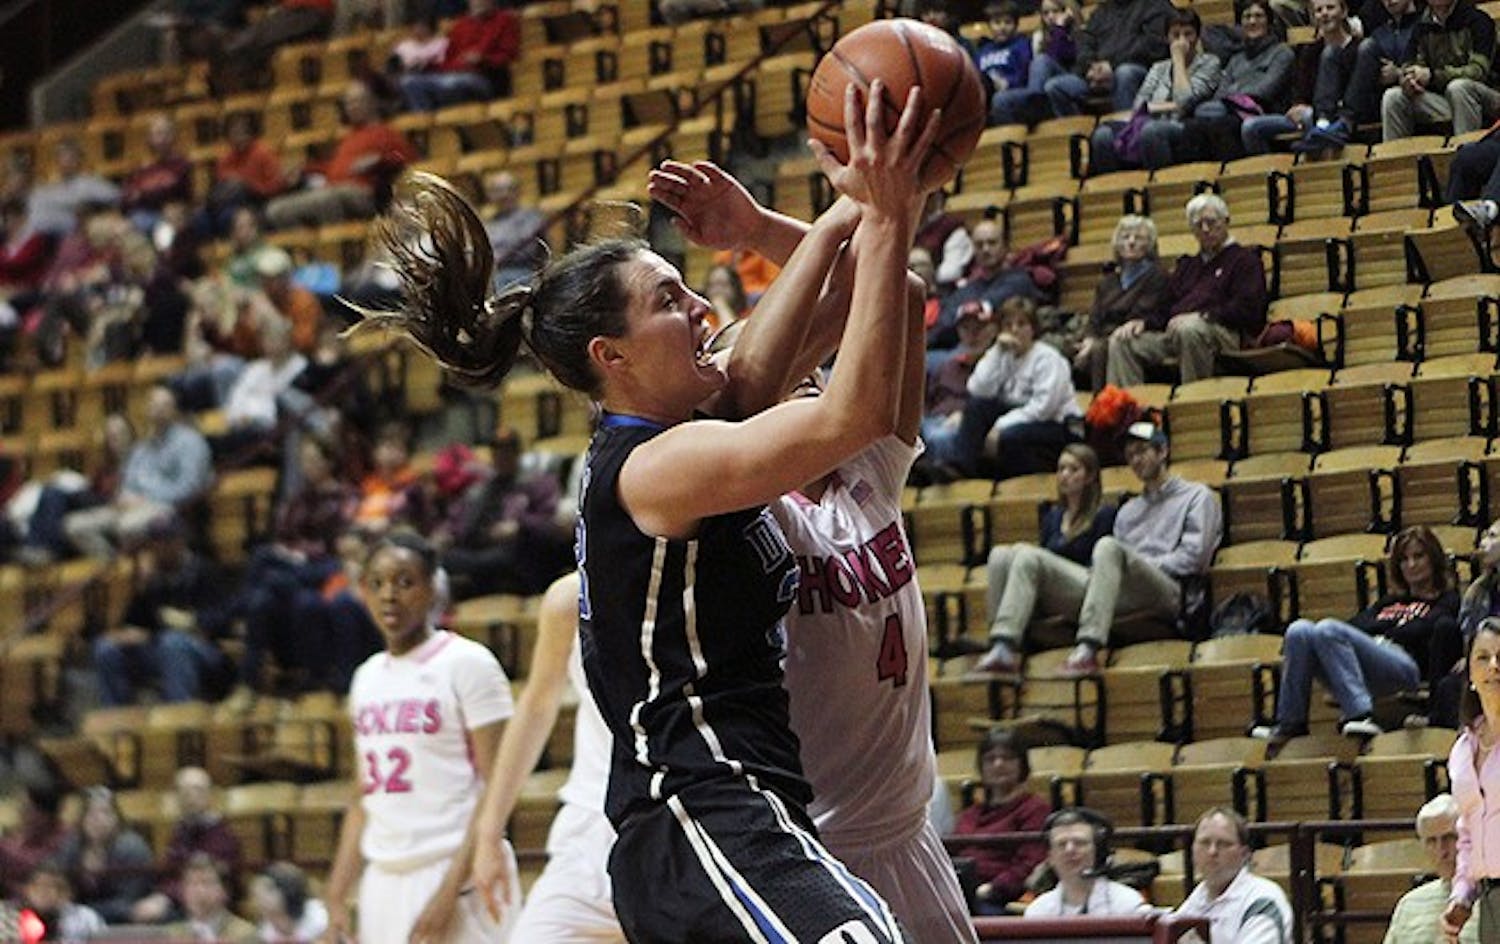 Haley Peters matched a career high with 25 points.